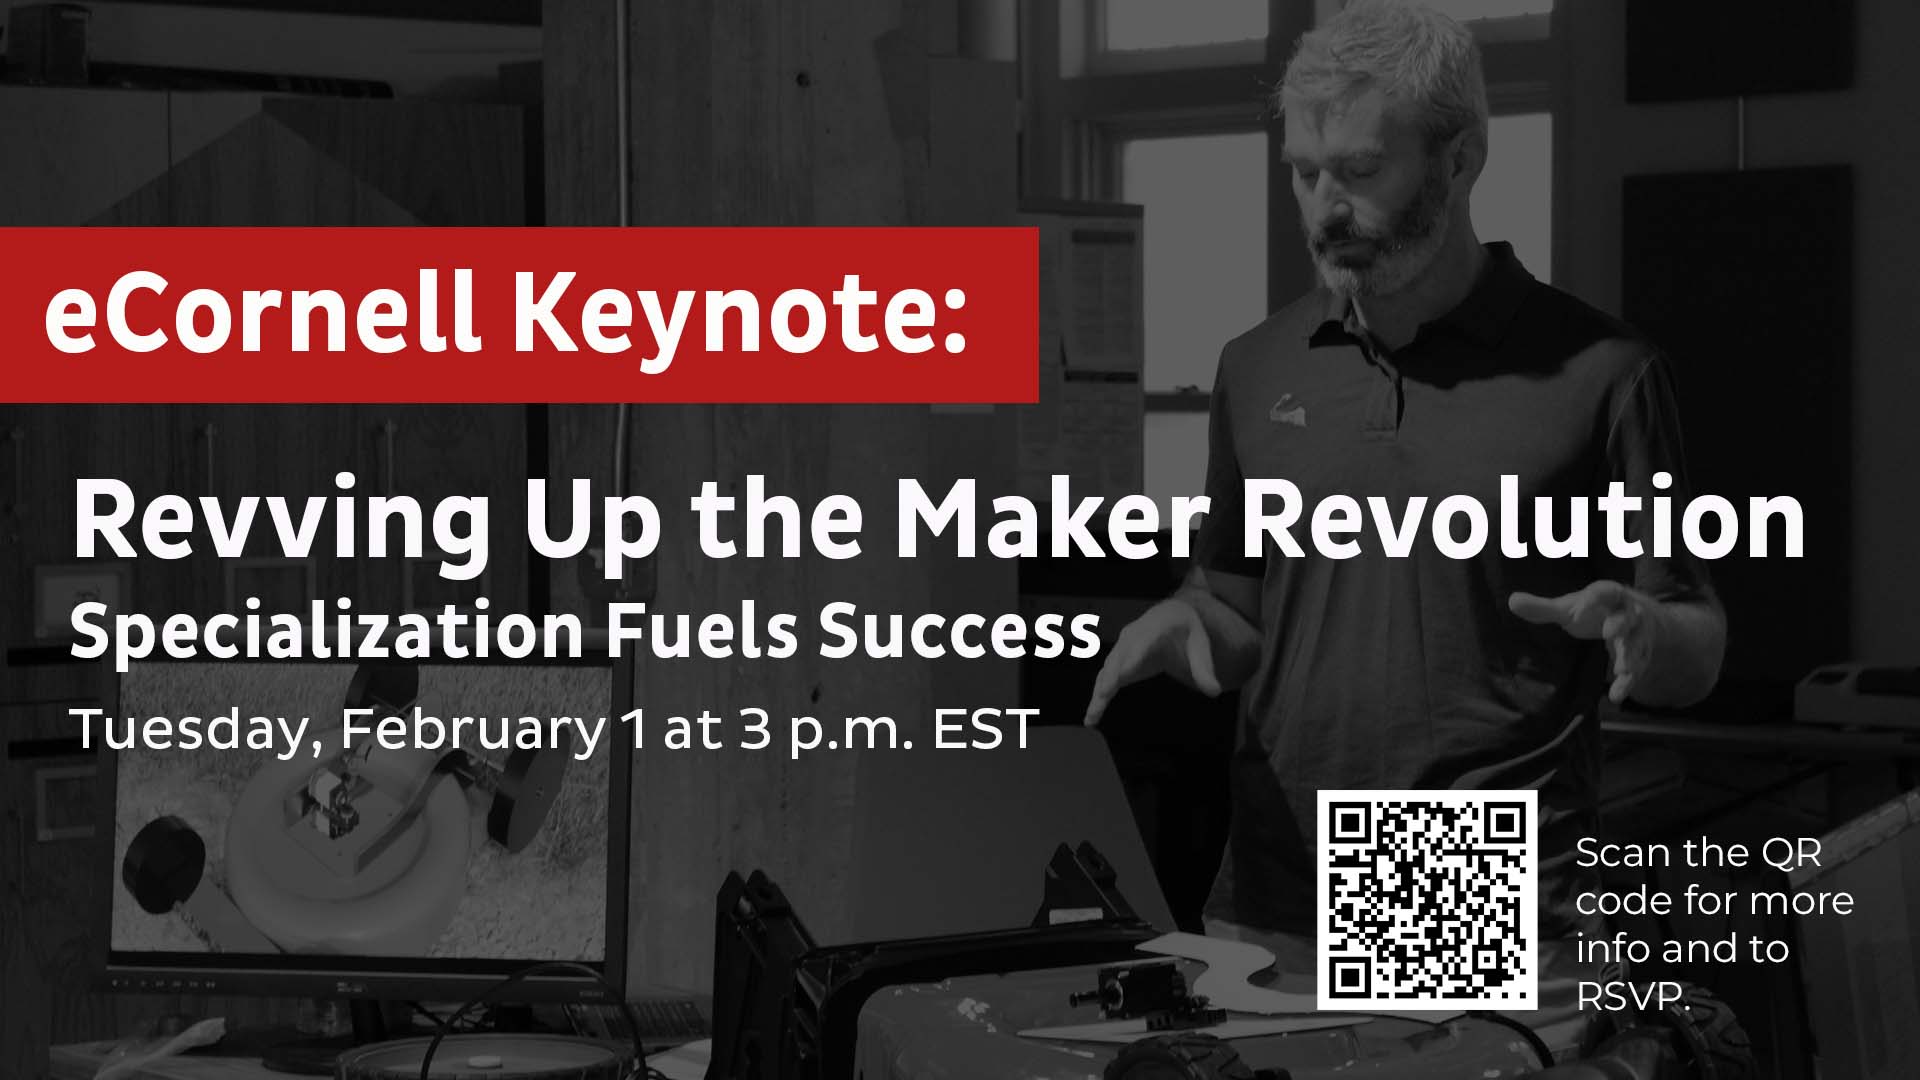 eCornell Keynote. Revving Up the Maker Revolution: Specialization Fuels Success. February 1 at 3:00 p.m. EST.